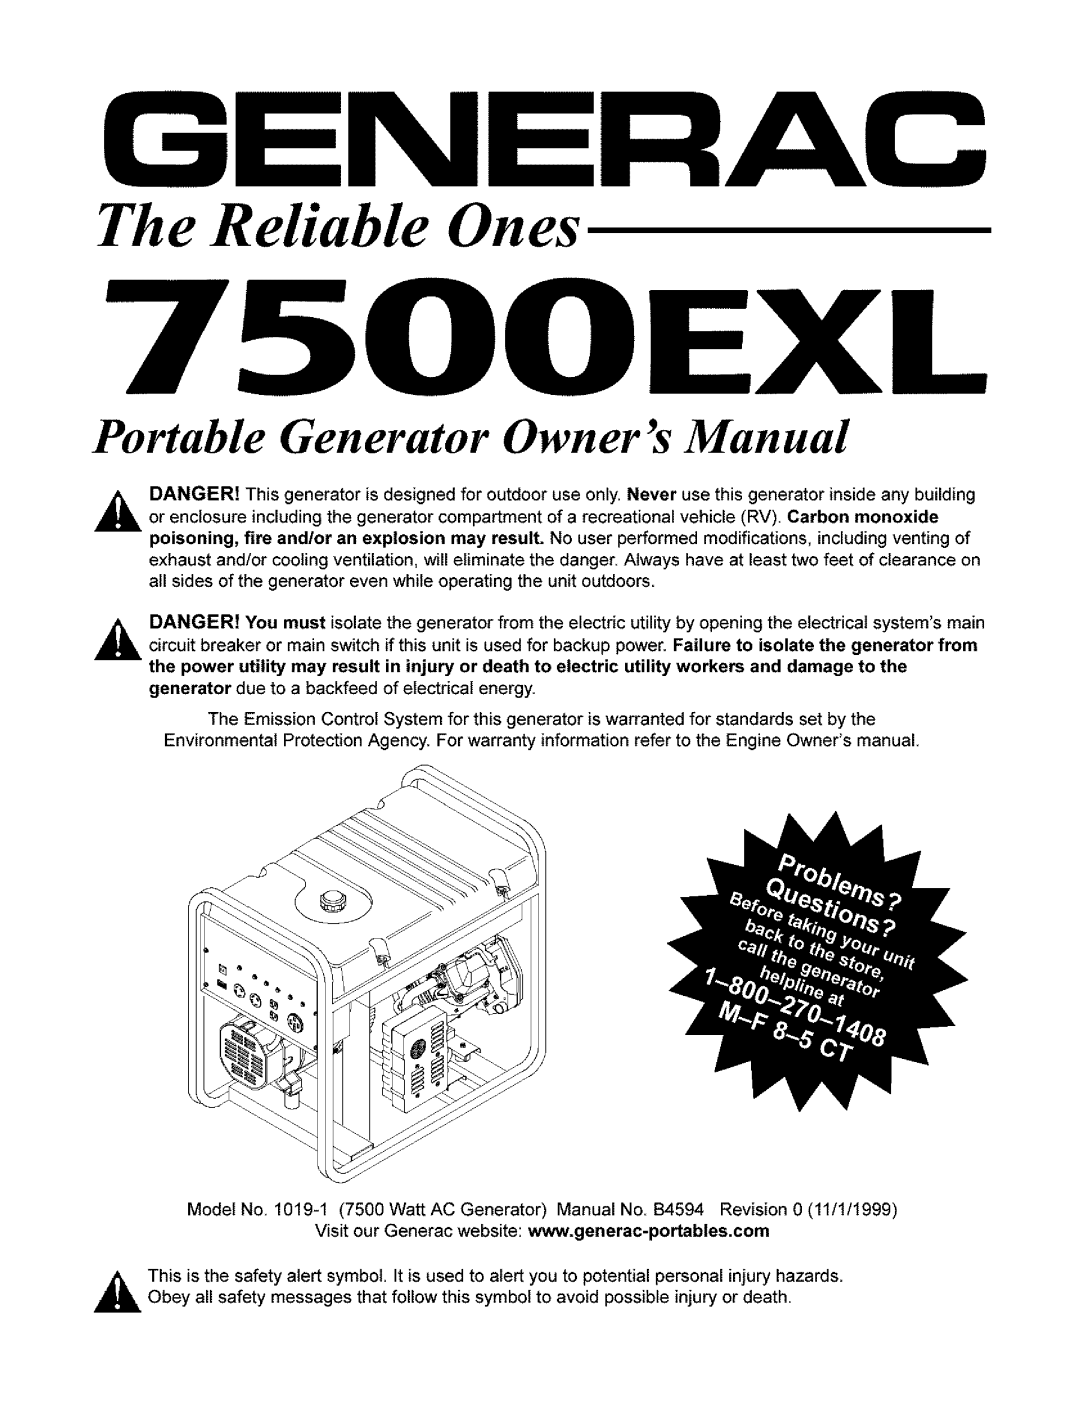 Generac owner manual 7500 L, The Reliable Ones 